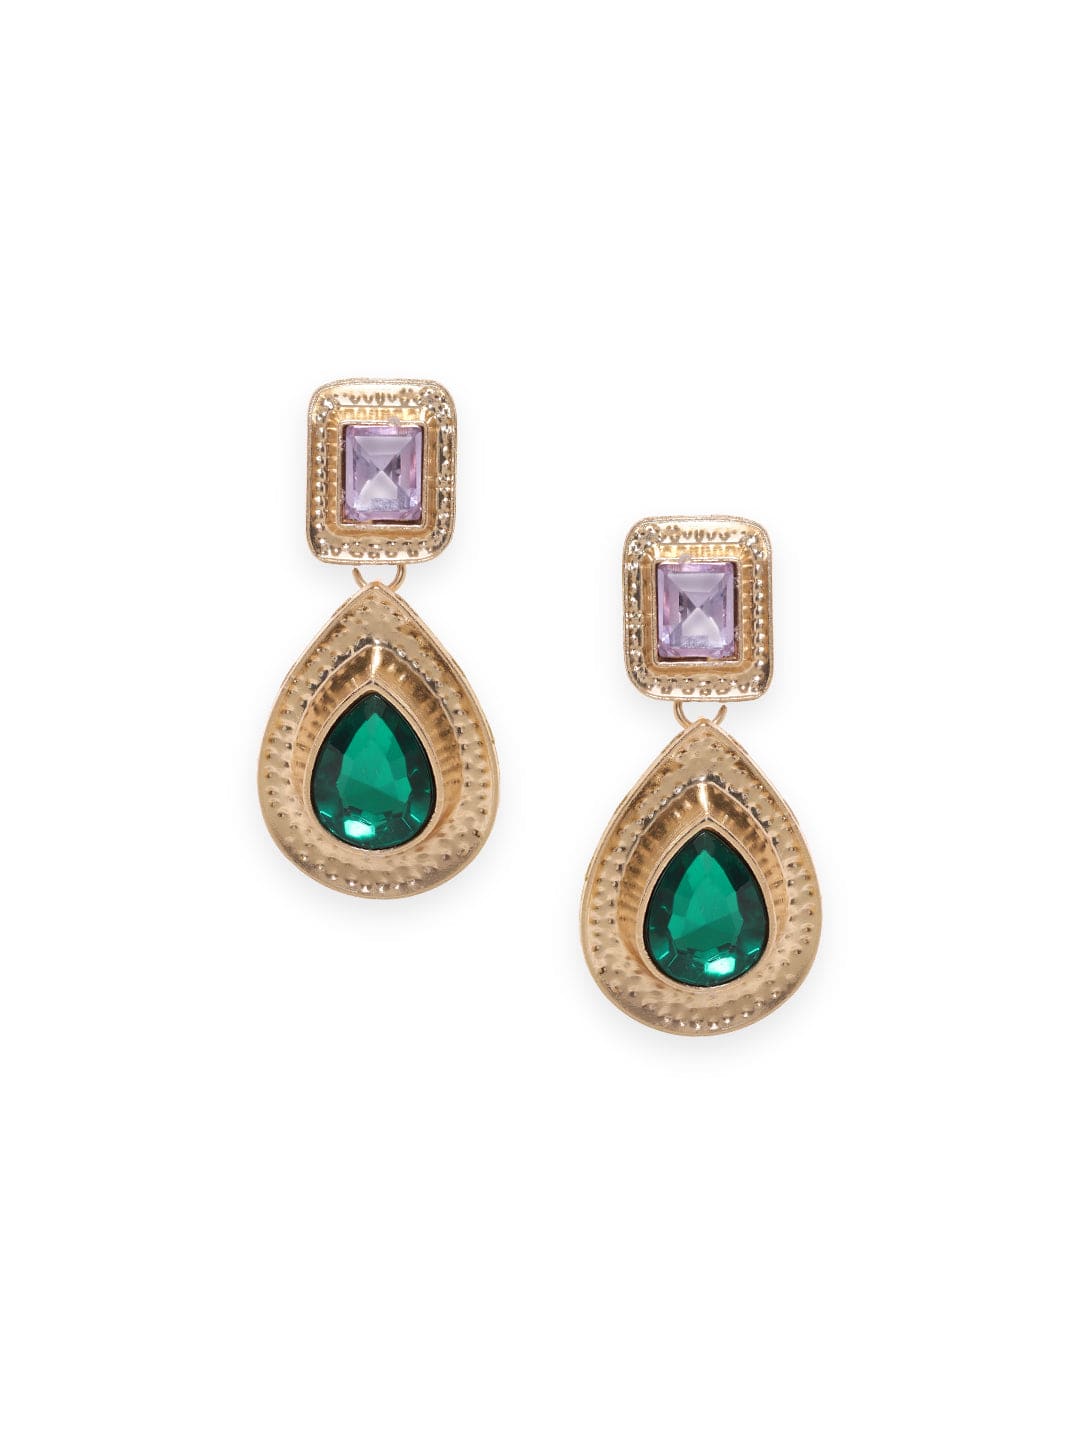 Rubans Voguish The Beauty of Contrast: Green and Blue Earrings Earrings